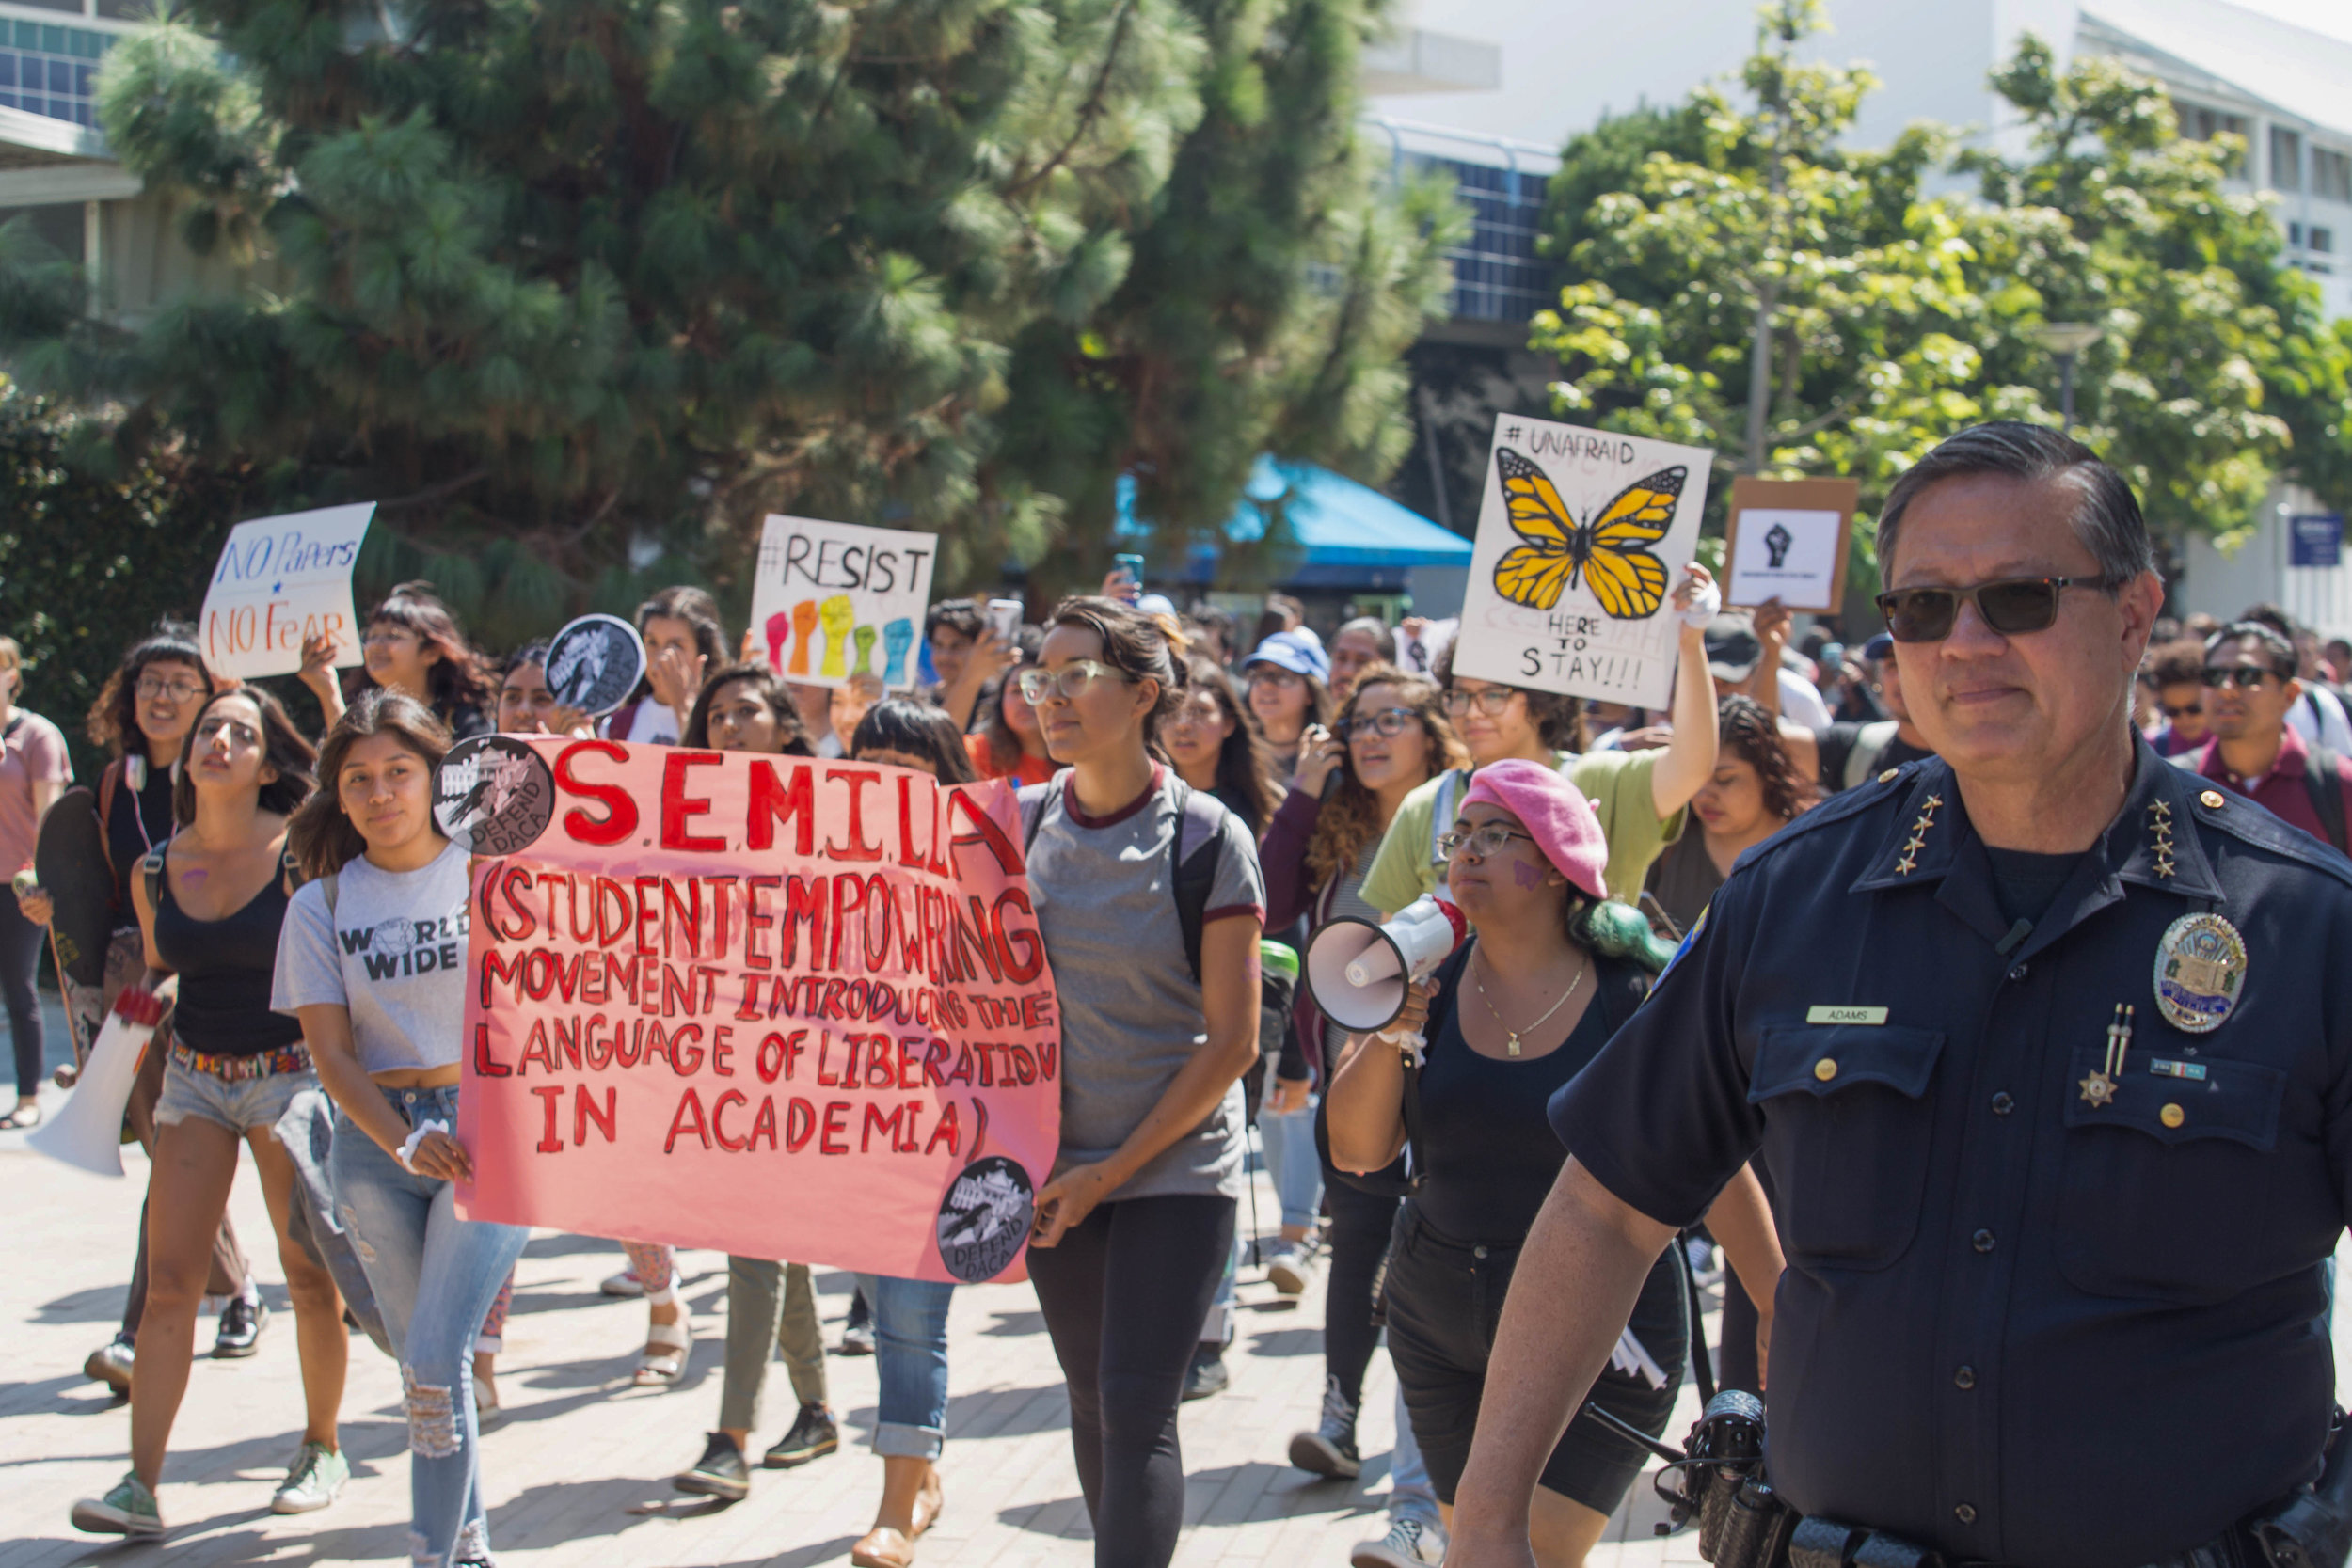  Santa Monica College Chief of Police Johnnie Adams ensures the safety of S.E.M.I.L.L.A. protestors as Estephanie Guardud holds a Megaphone as the protesters march through Santa Monica College Main Campus' Quad. The protesters attract the attention o